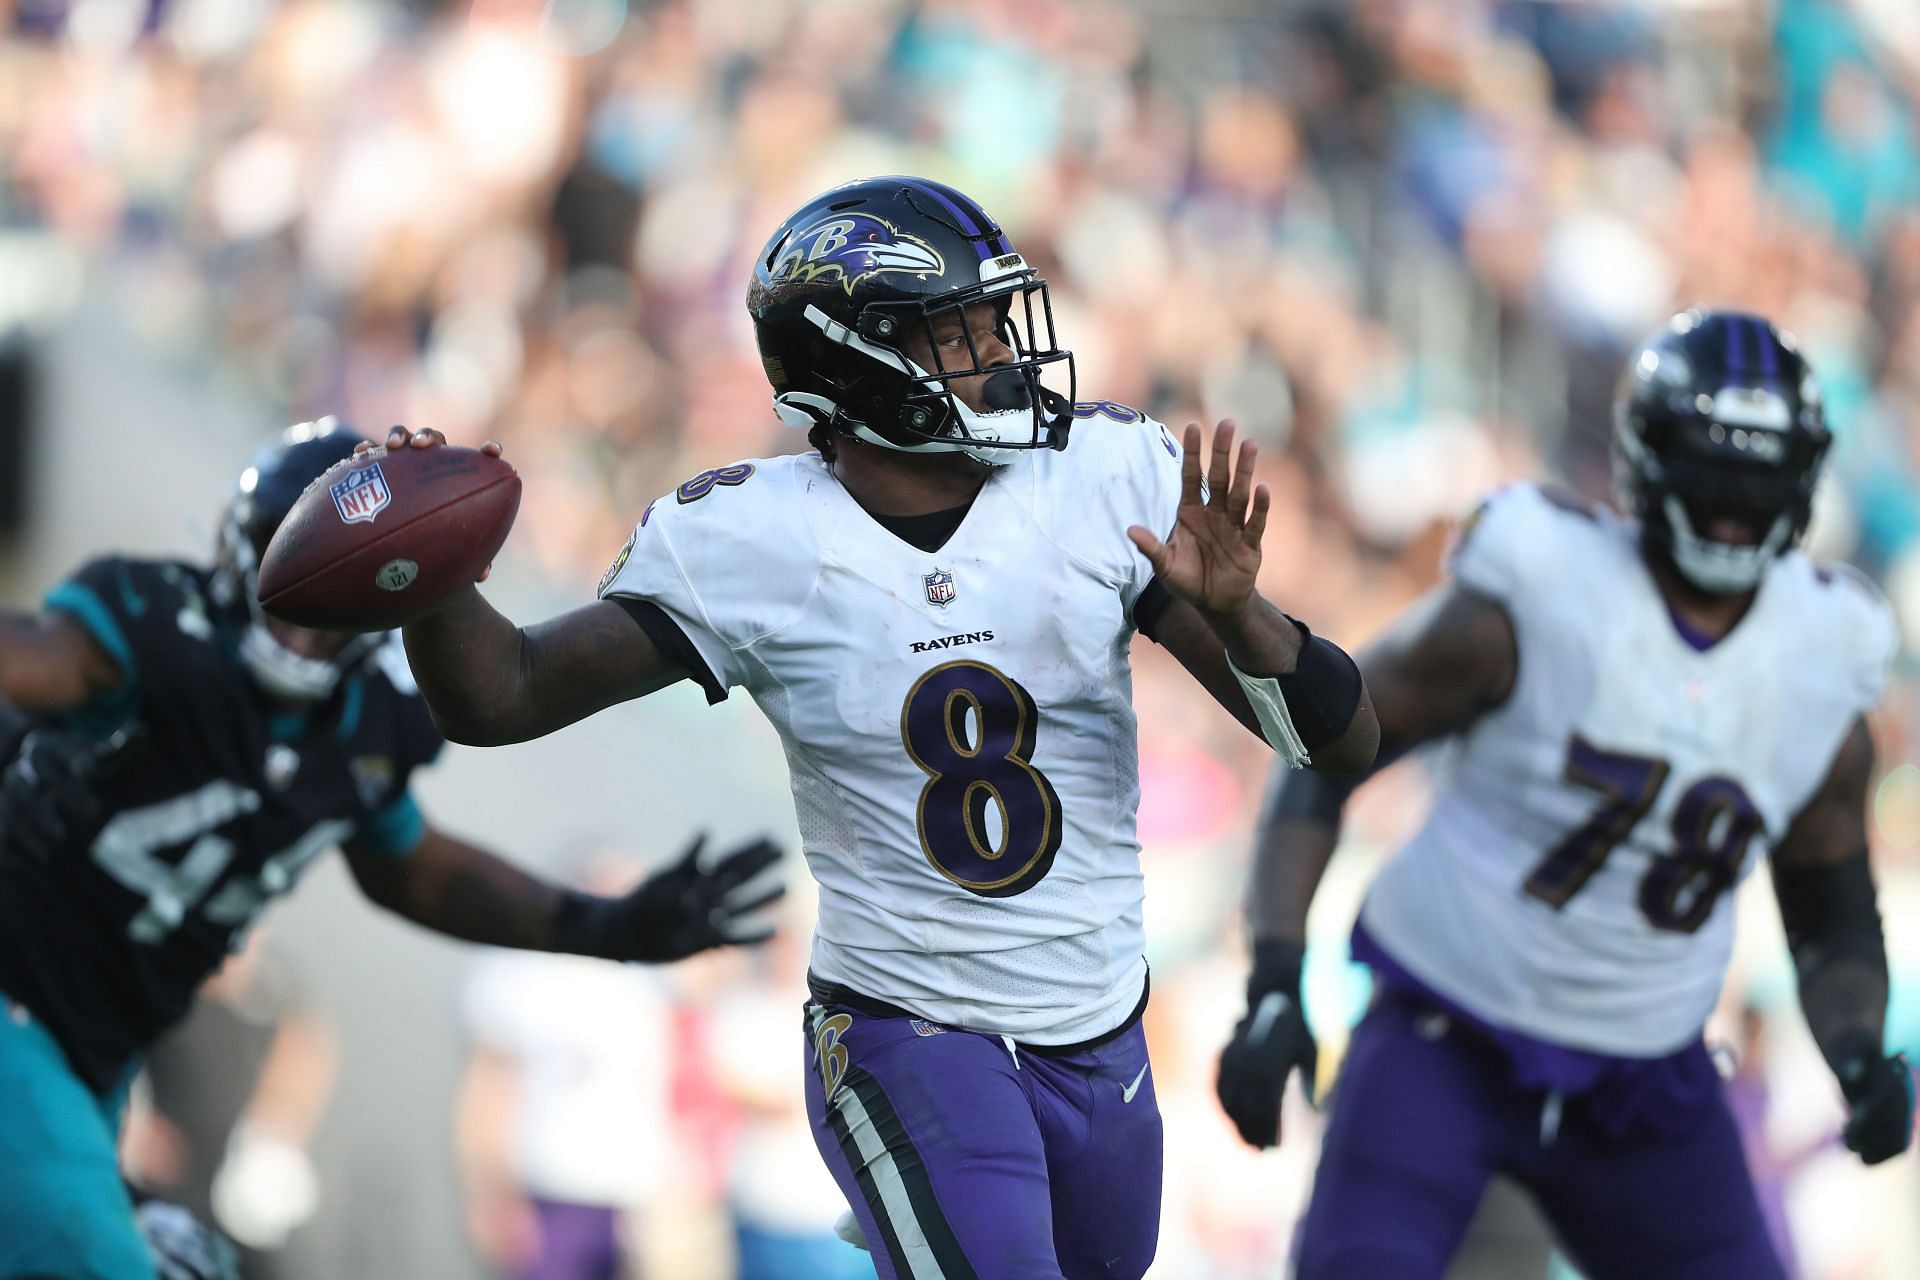 The Ravens are nothing without Lamar Jackson